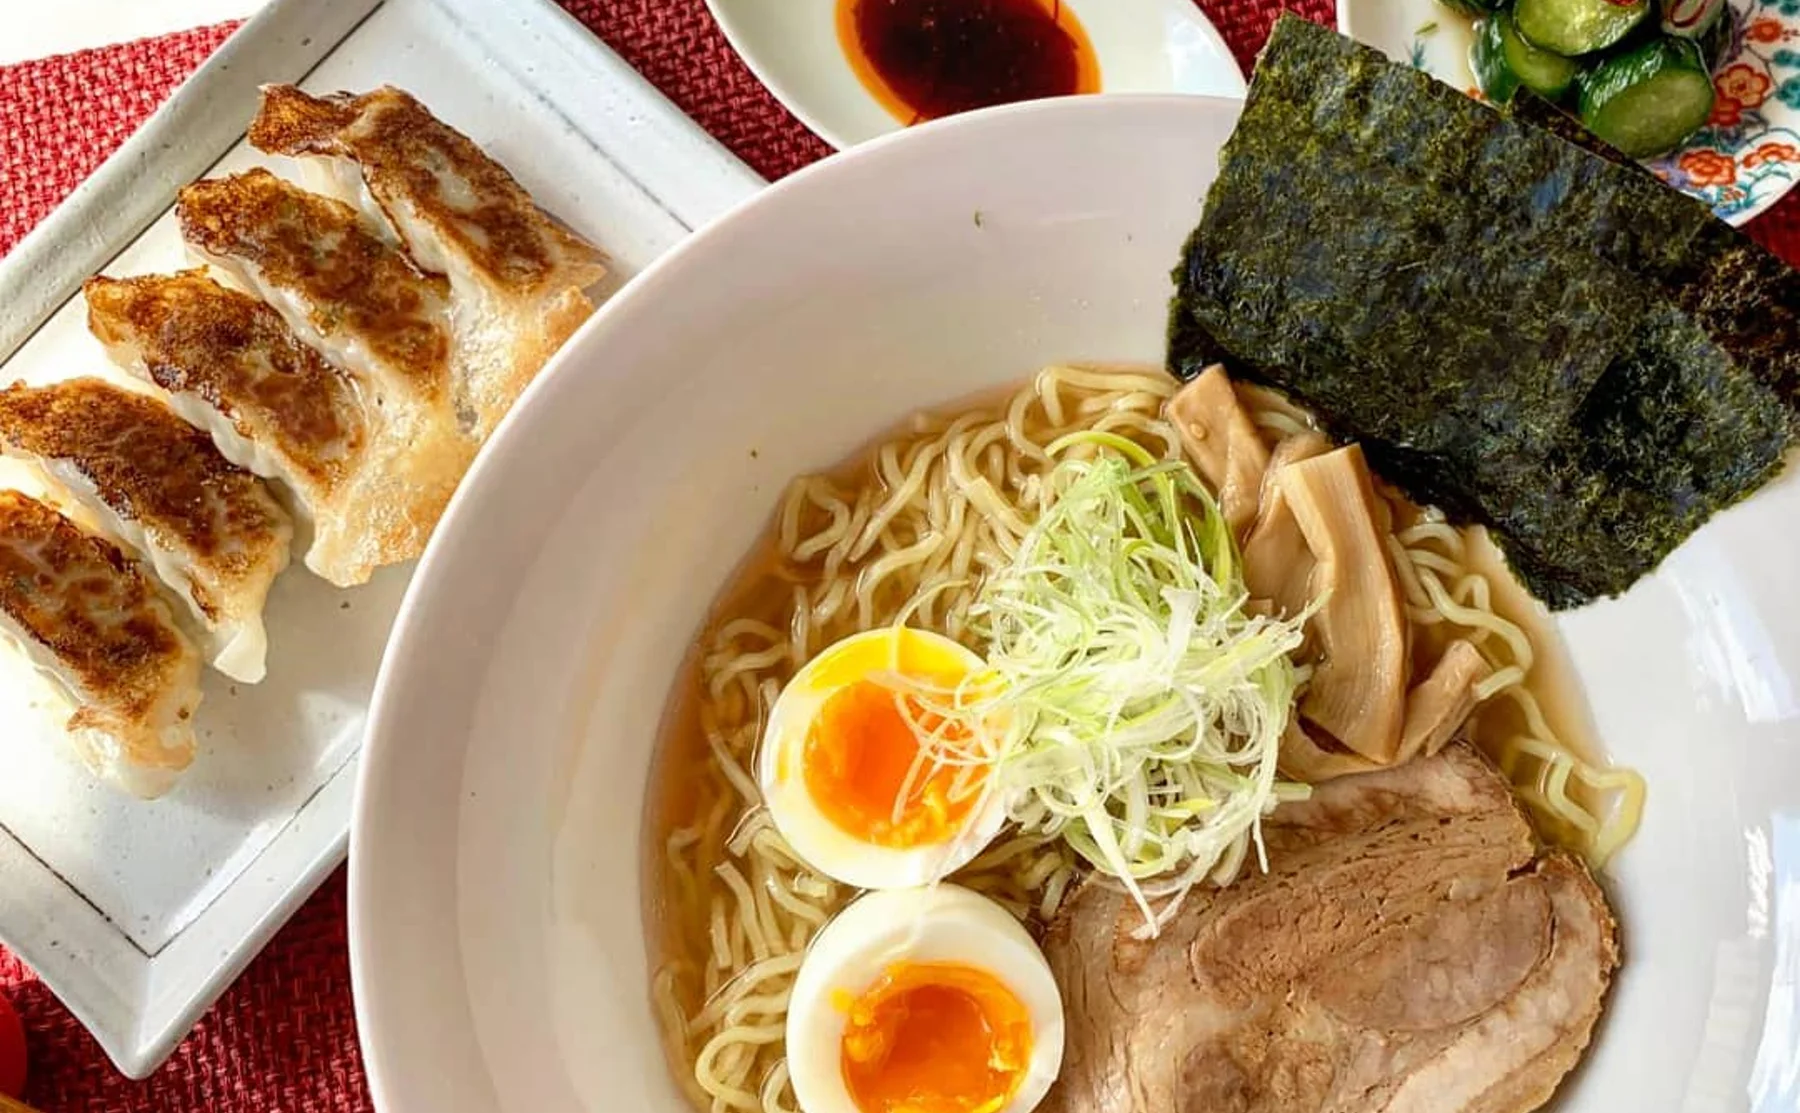 Home style Ramen & Gyoza cooking class in a Japanese home - 1371898